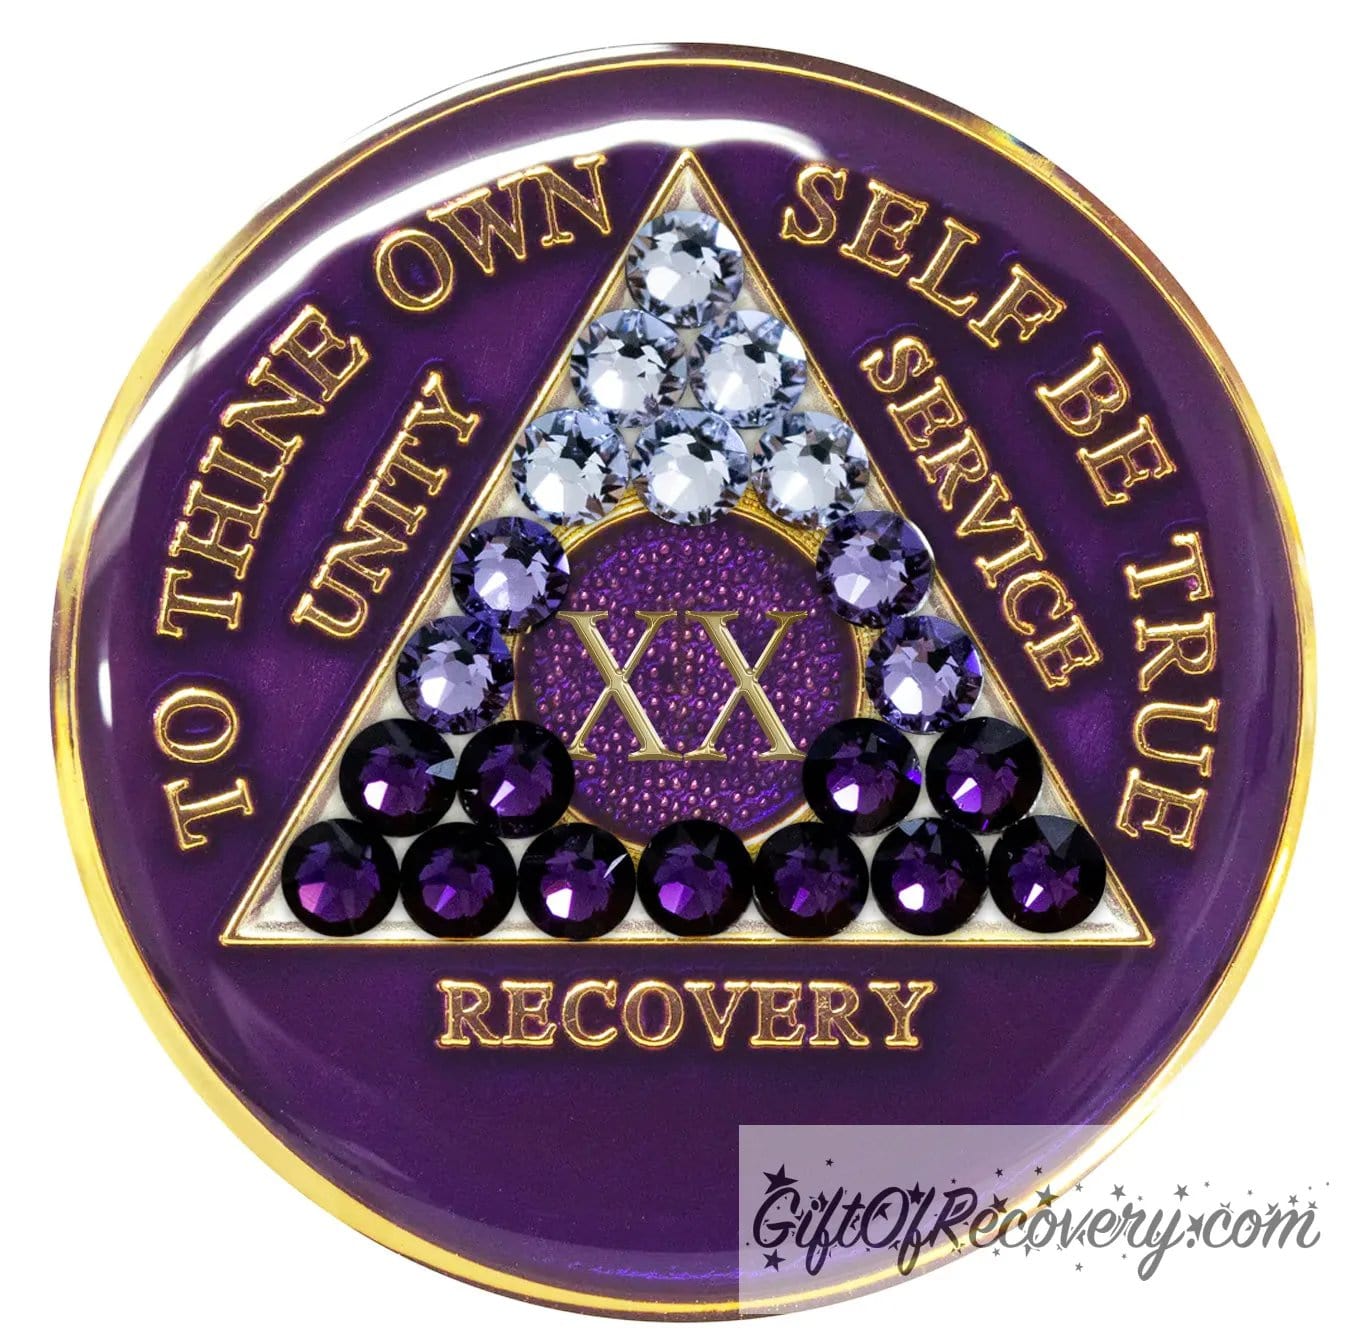 20 year Amethyst purple AA medallion with 21 genuine crystals ranging from light to dark for symbolism of transition, the triangle, circle, roman numeral, unity, recovery, service, and to thine own self be true, are embossed with 14k gold, while the middle of the circle with the roman numeral is purple glitter, the recovery medallion is sealed with resin for a glossy finish. 